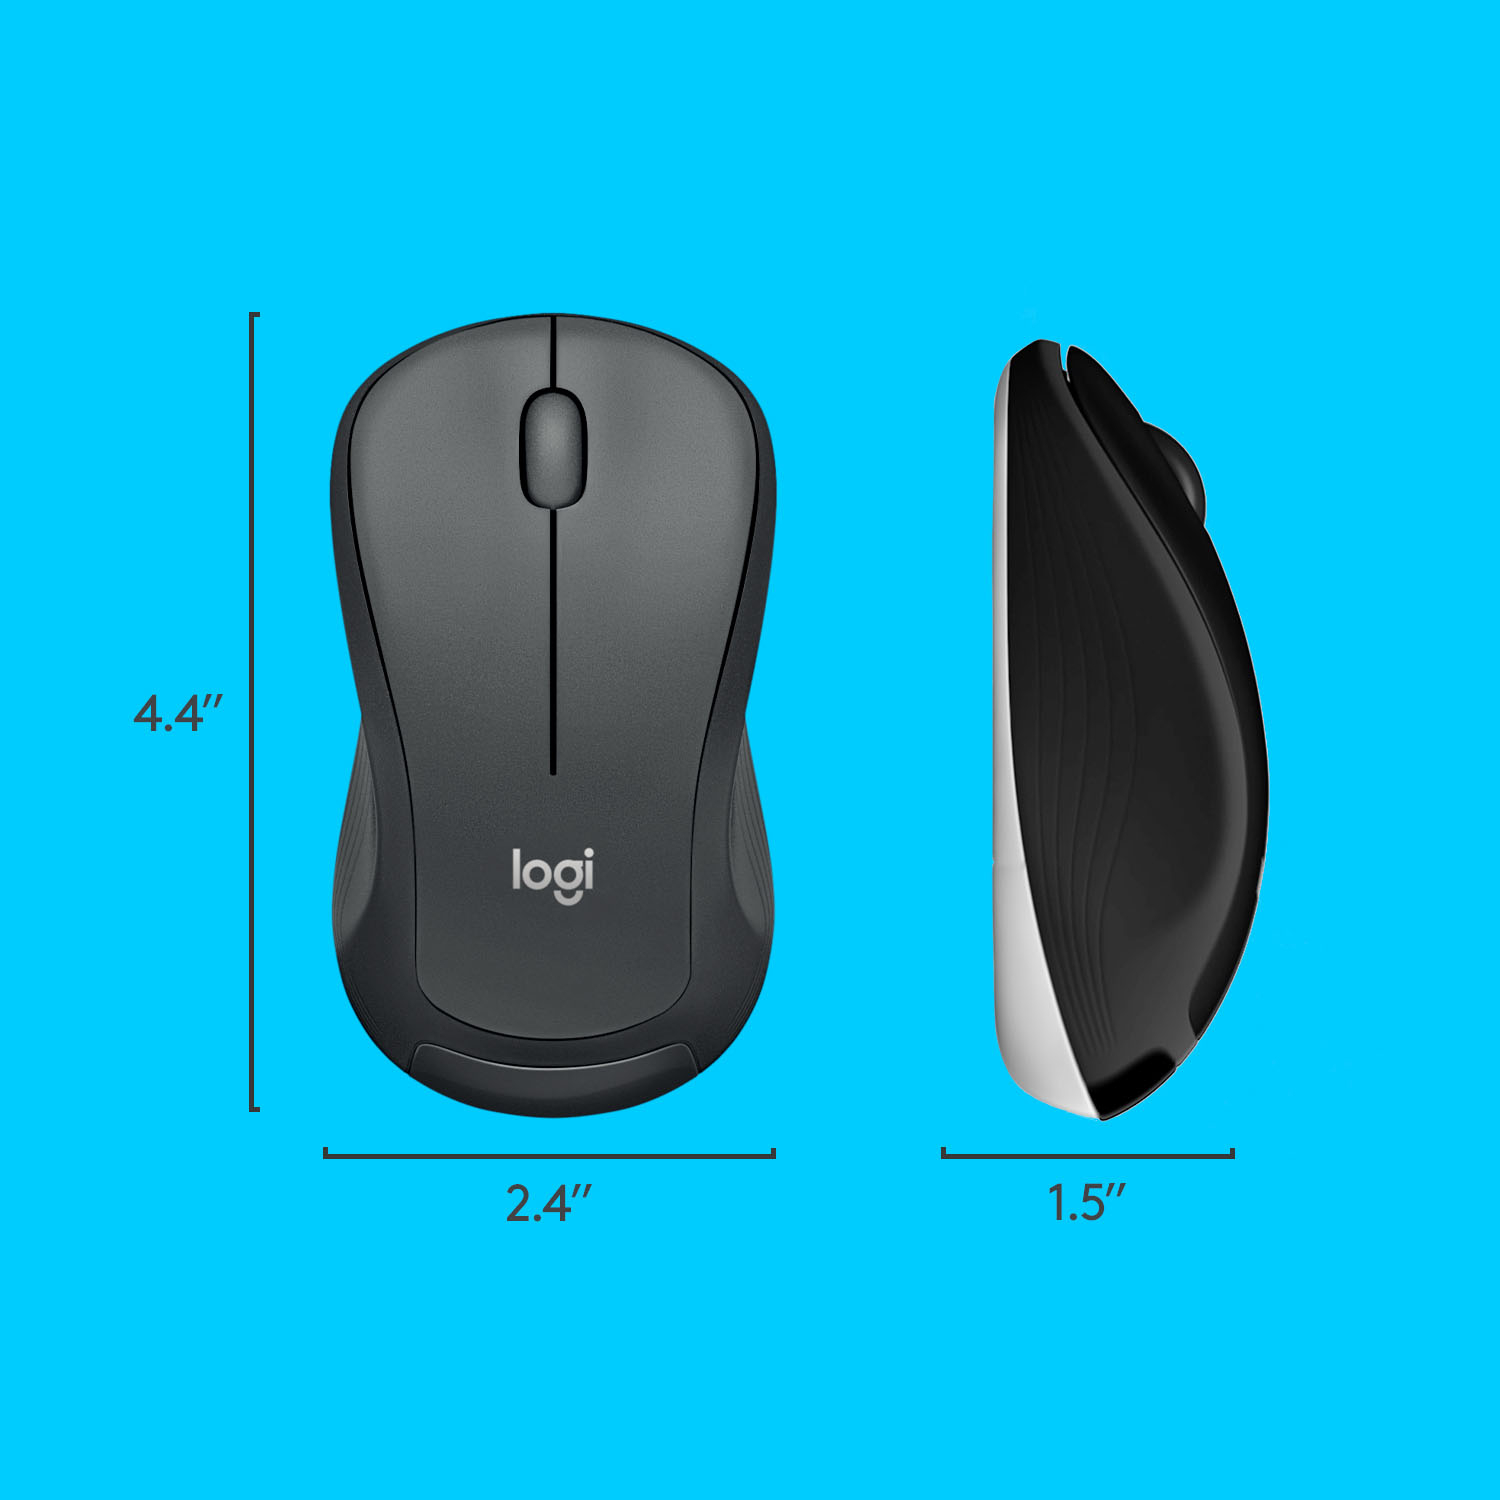 and 920-008671 Wireless Buy MK540 for Best Combo Membrane Logitech Mouse - Full-size Advanced PC Keyboard Black